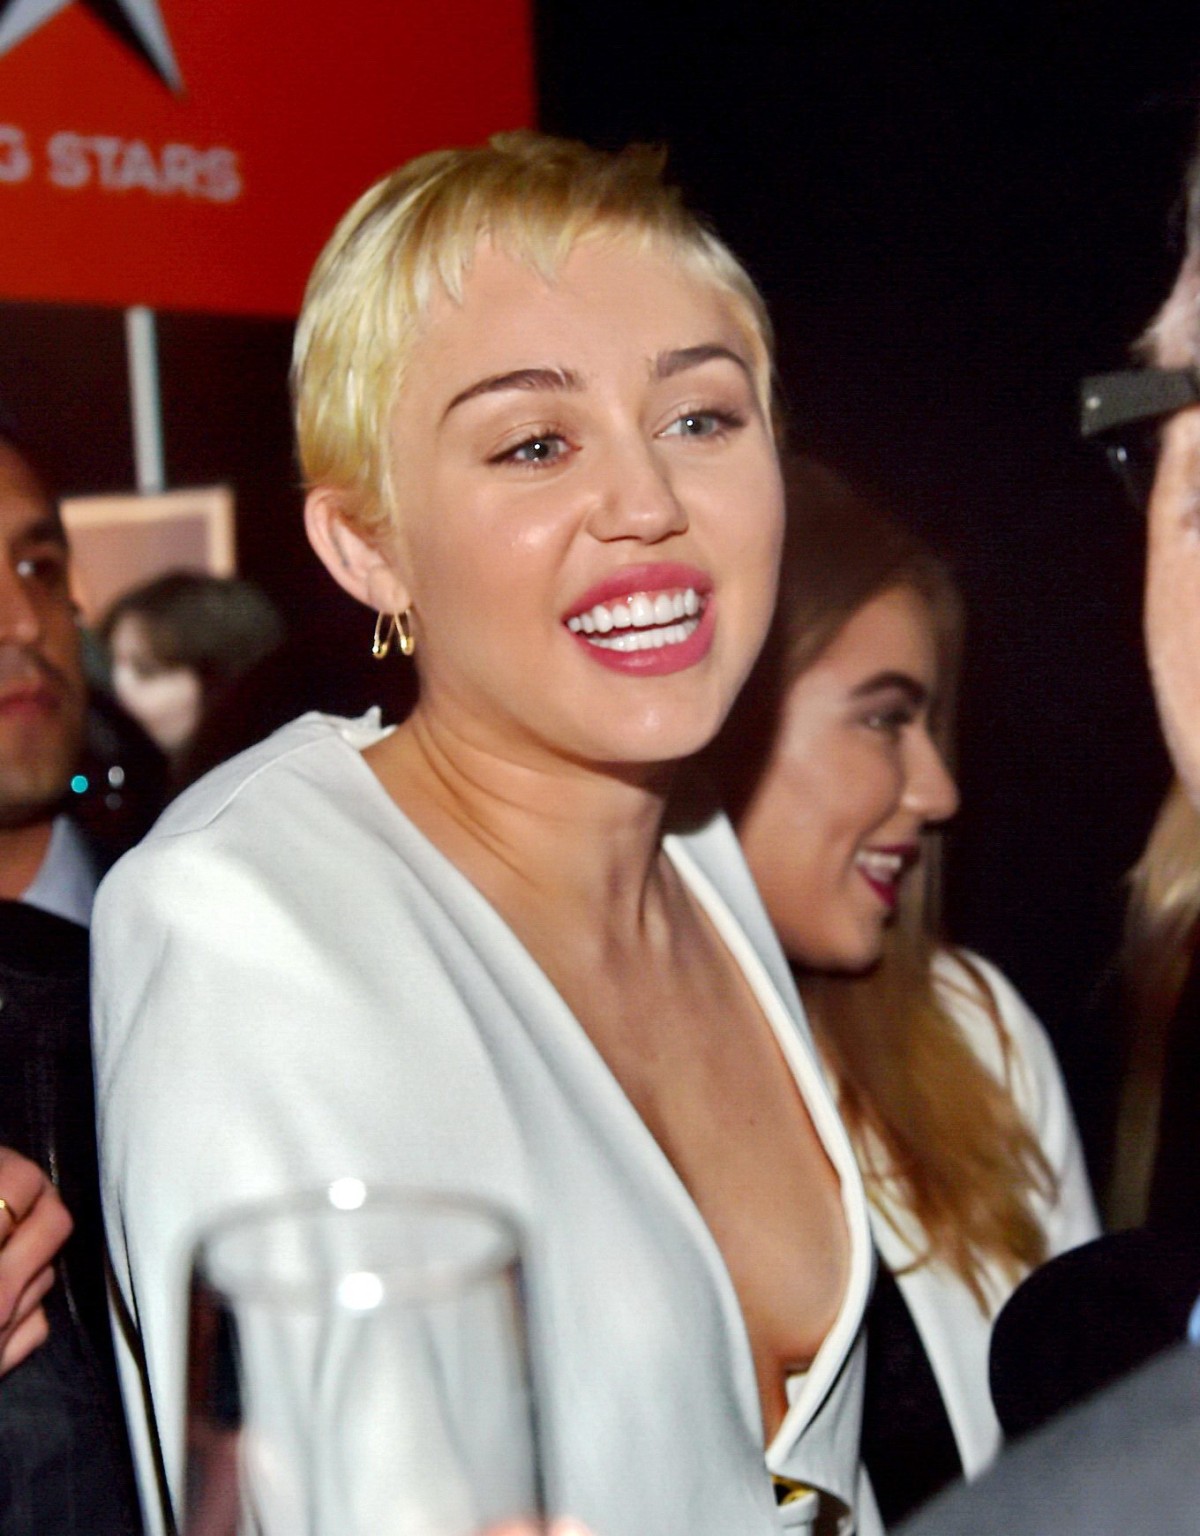 Miley Cyrus Braless Shows Cleavage Attending The W Magazine Shooting Stars Exhib